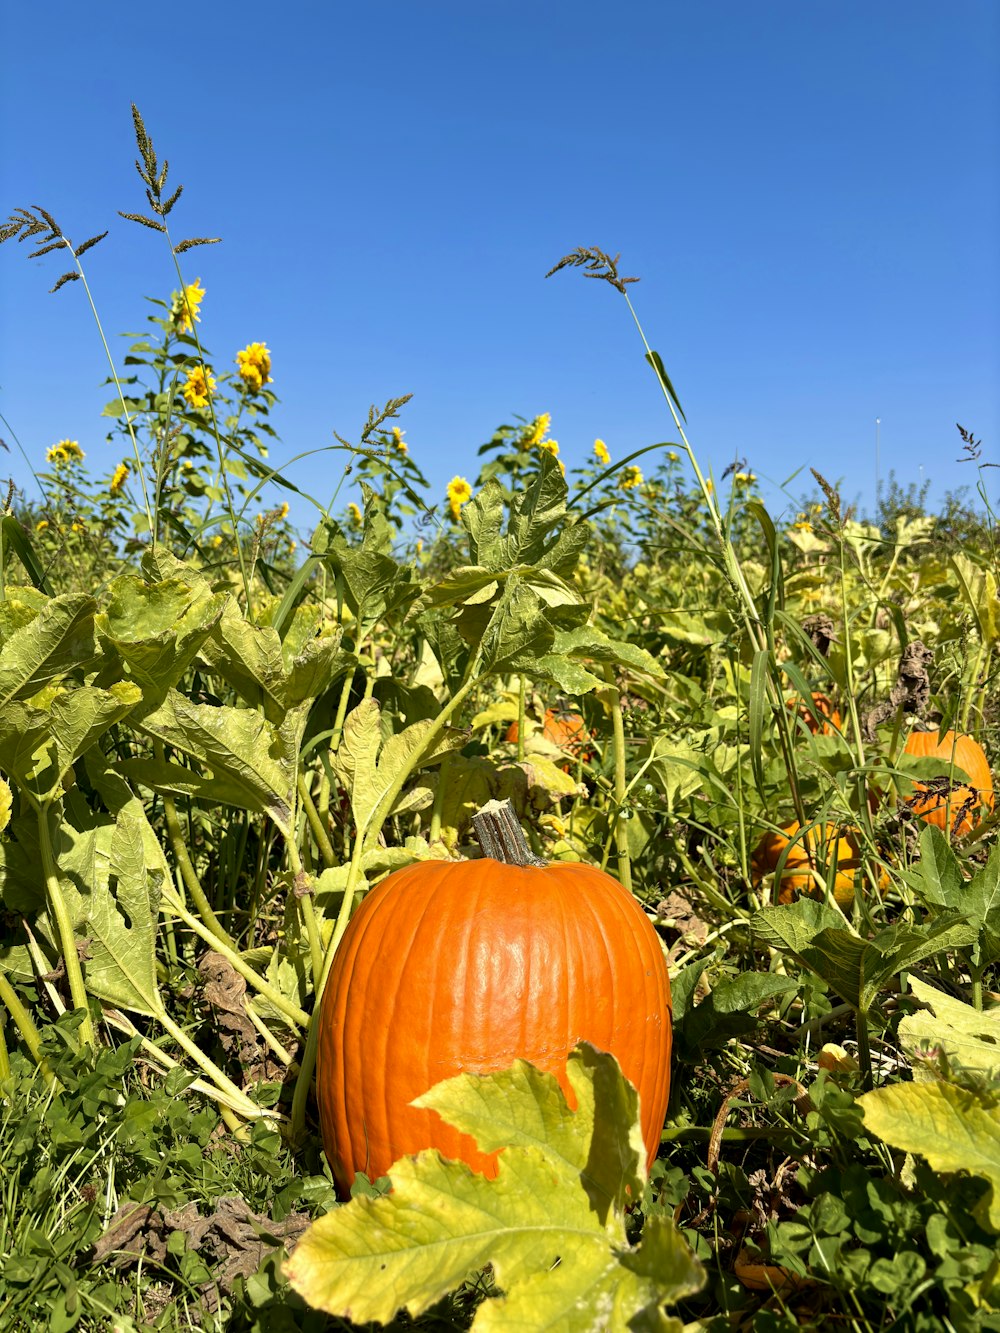 a pumpkin sitting in the middle of a field of sunflowers